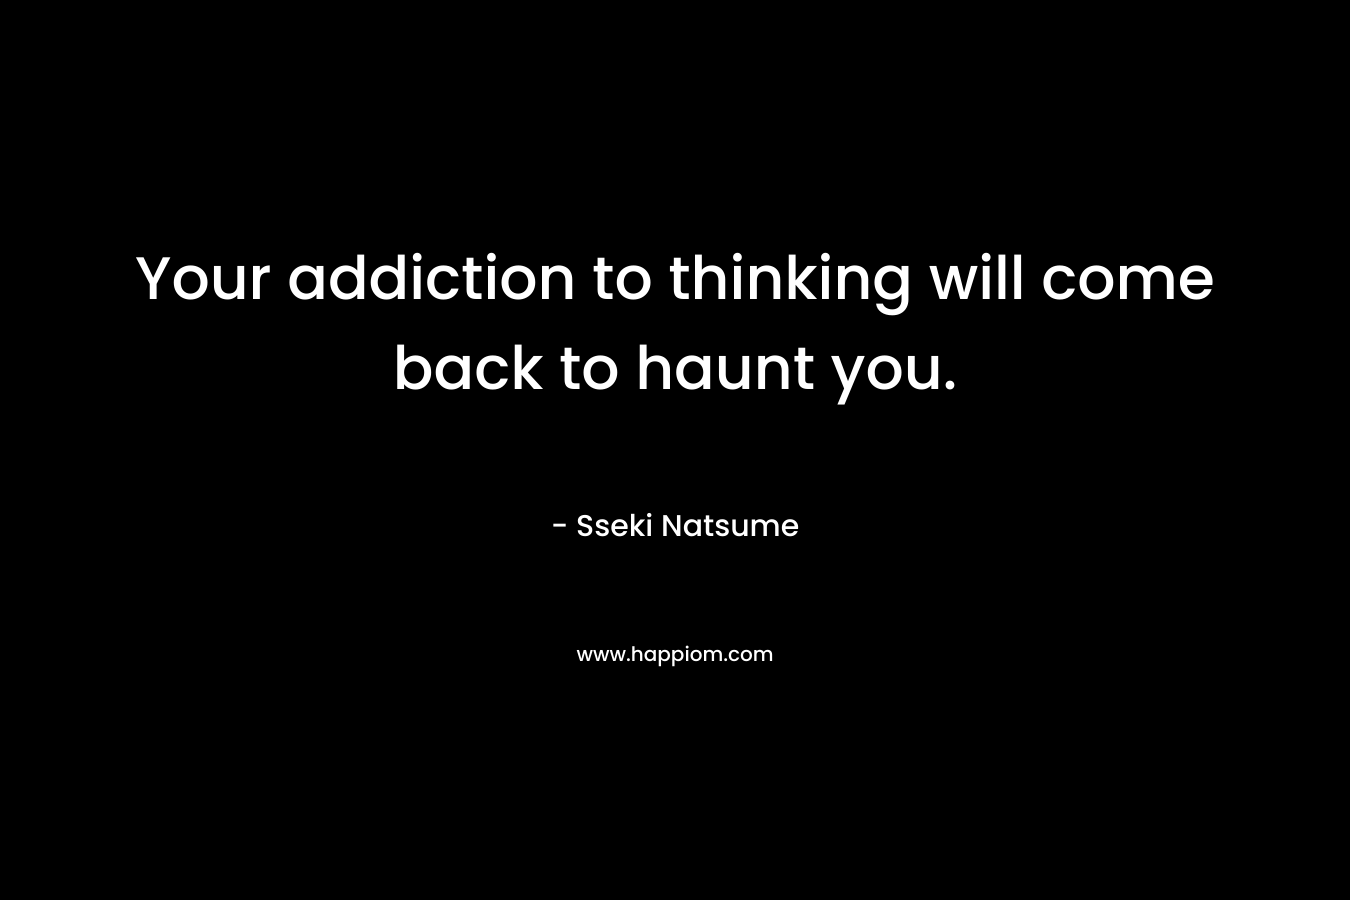 Your addiction to thinking will come back to haunt you.